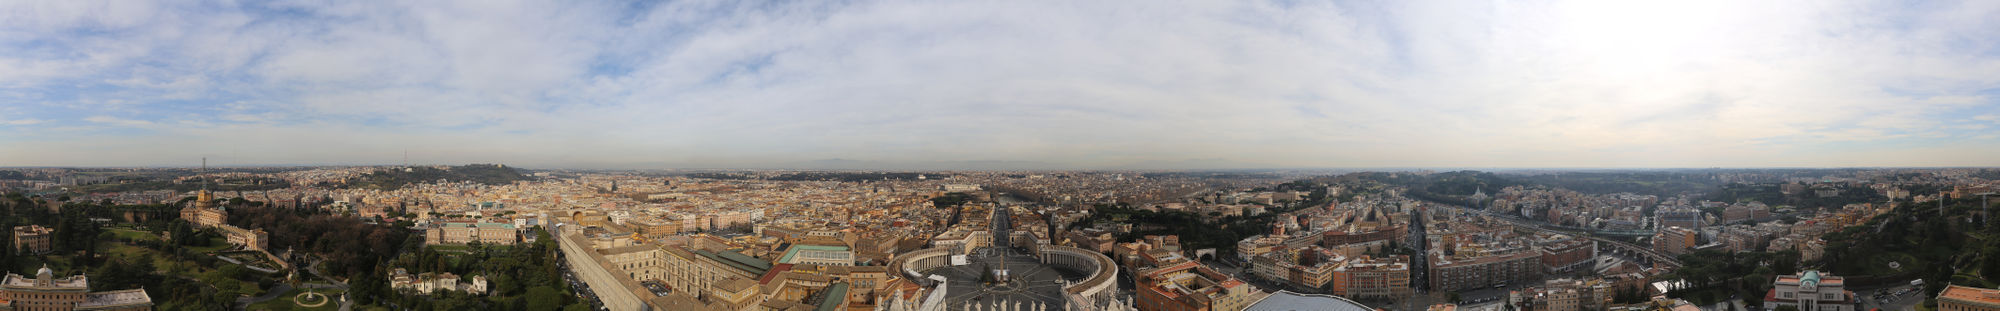 Panorama view from the dome of the St. Peter's Basilica